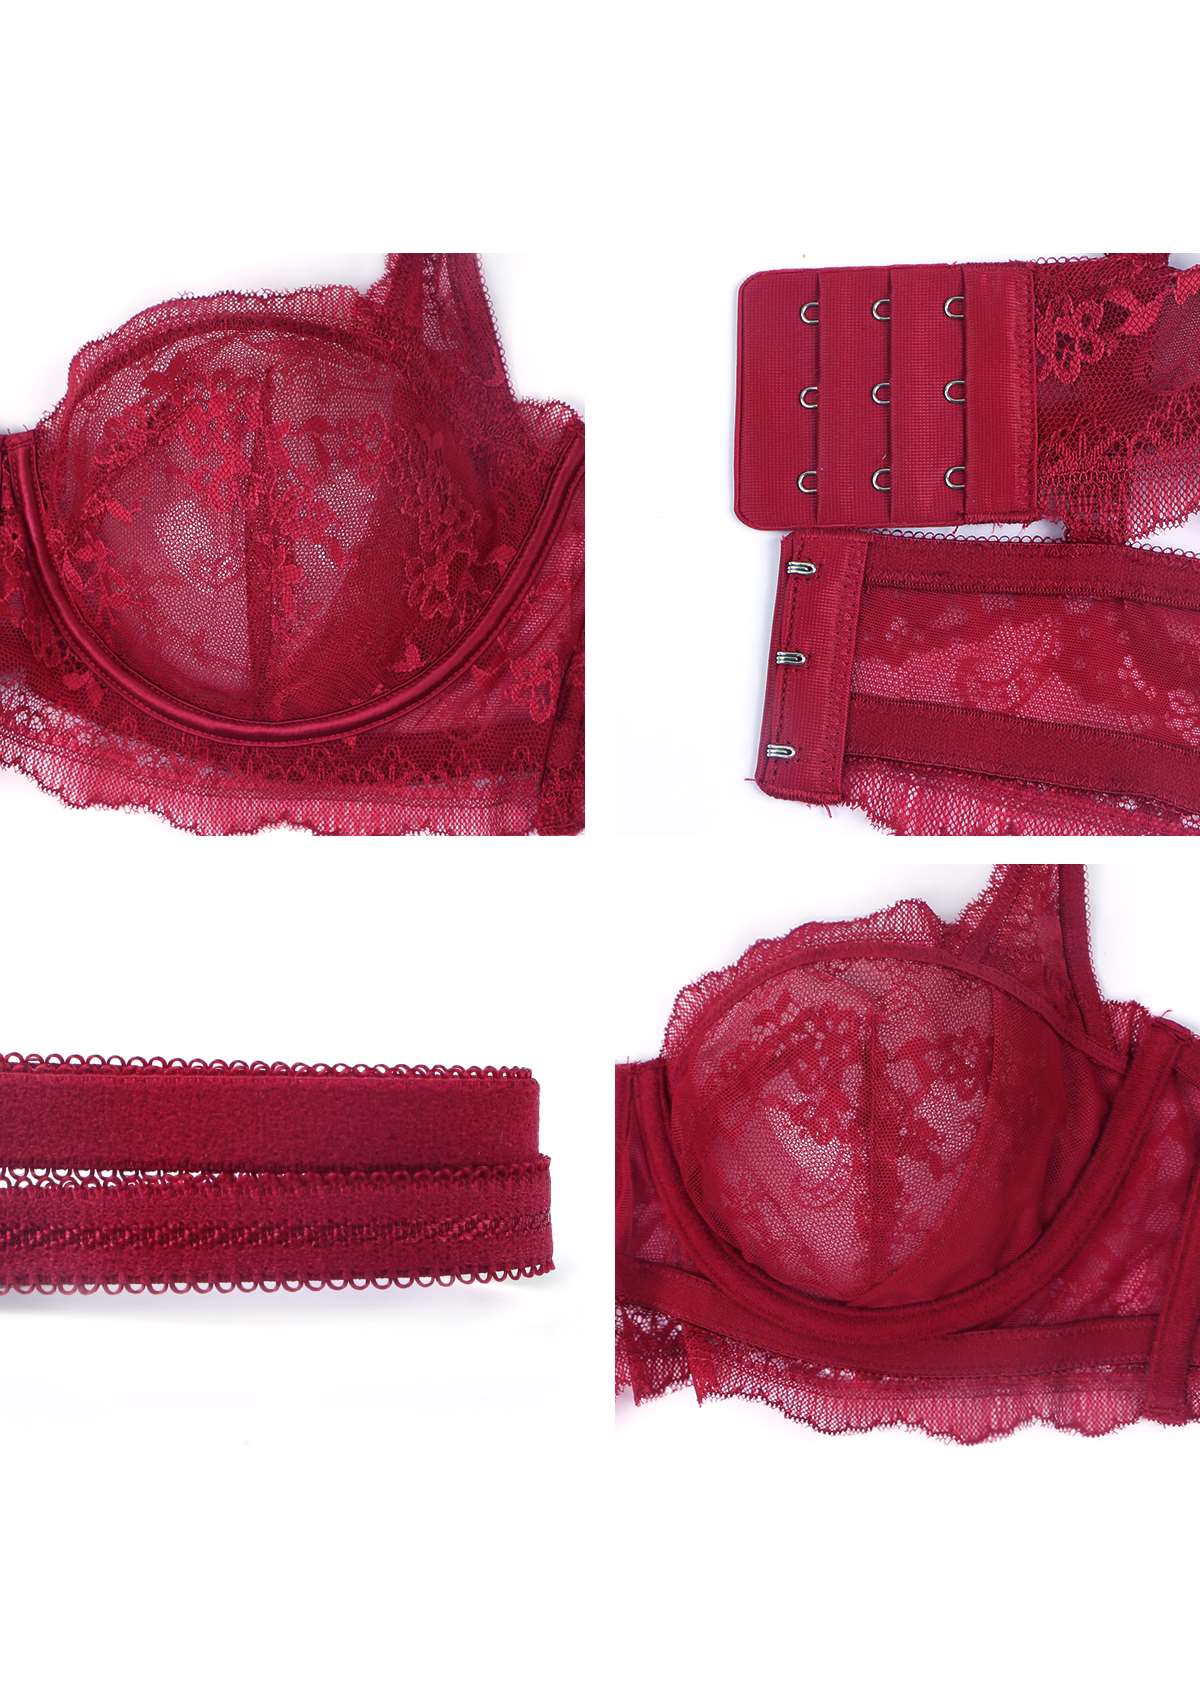 HSIA Floral Lace Unlined Bridal Balconette Bra Set - Supportive Classic - Burgundy / 38 / C